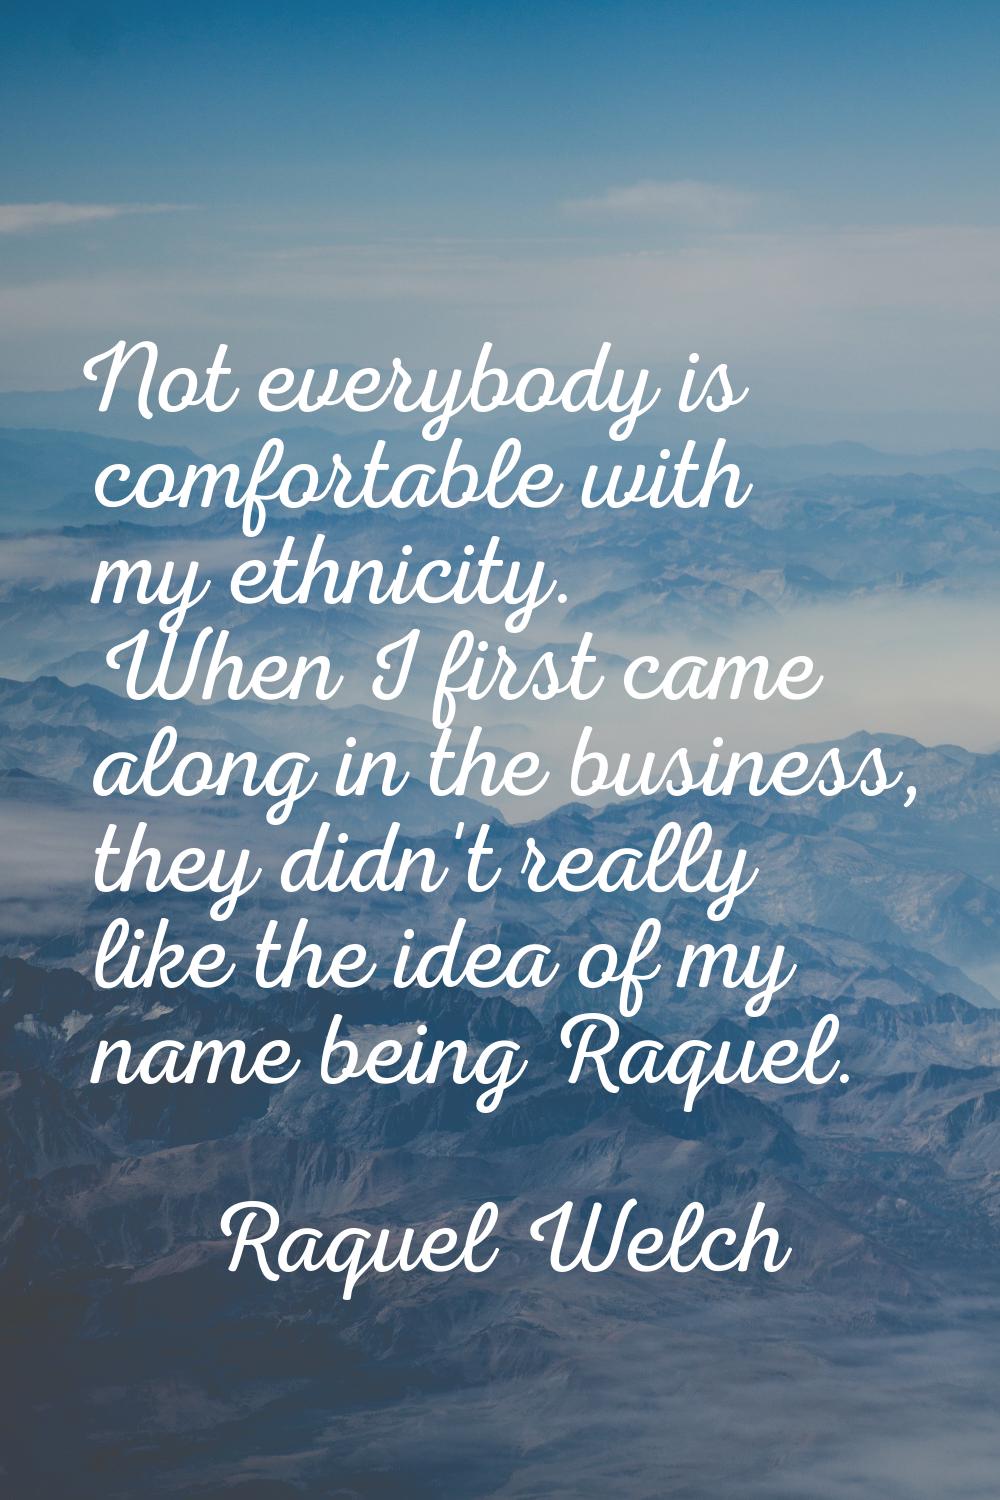 Not everybody is comfortable with my ethnicity. When I first came along in the business, they didn'